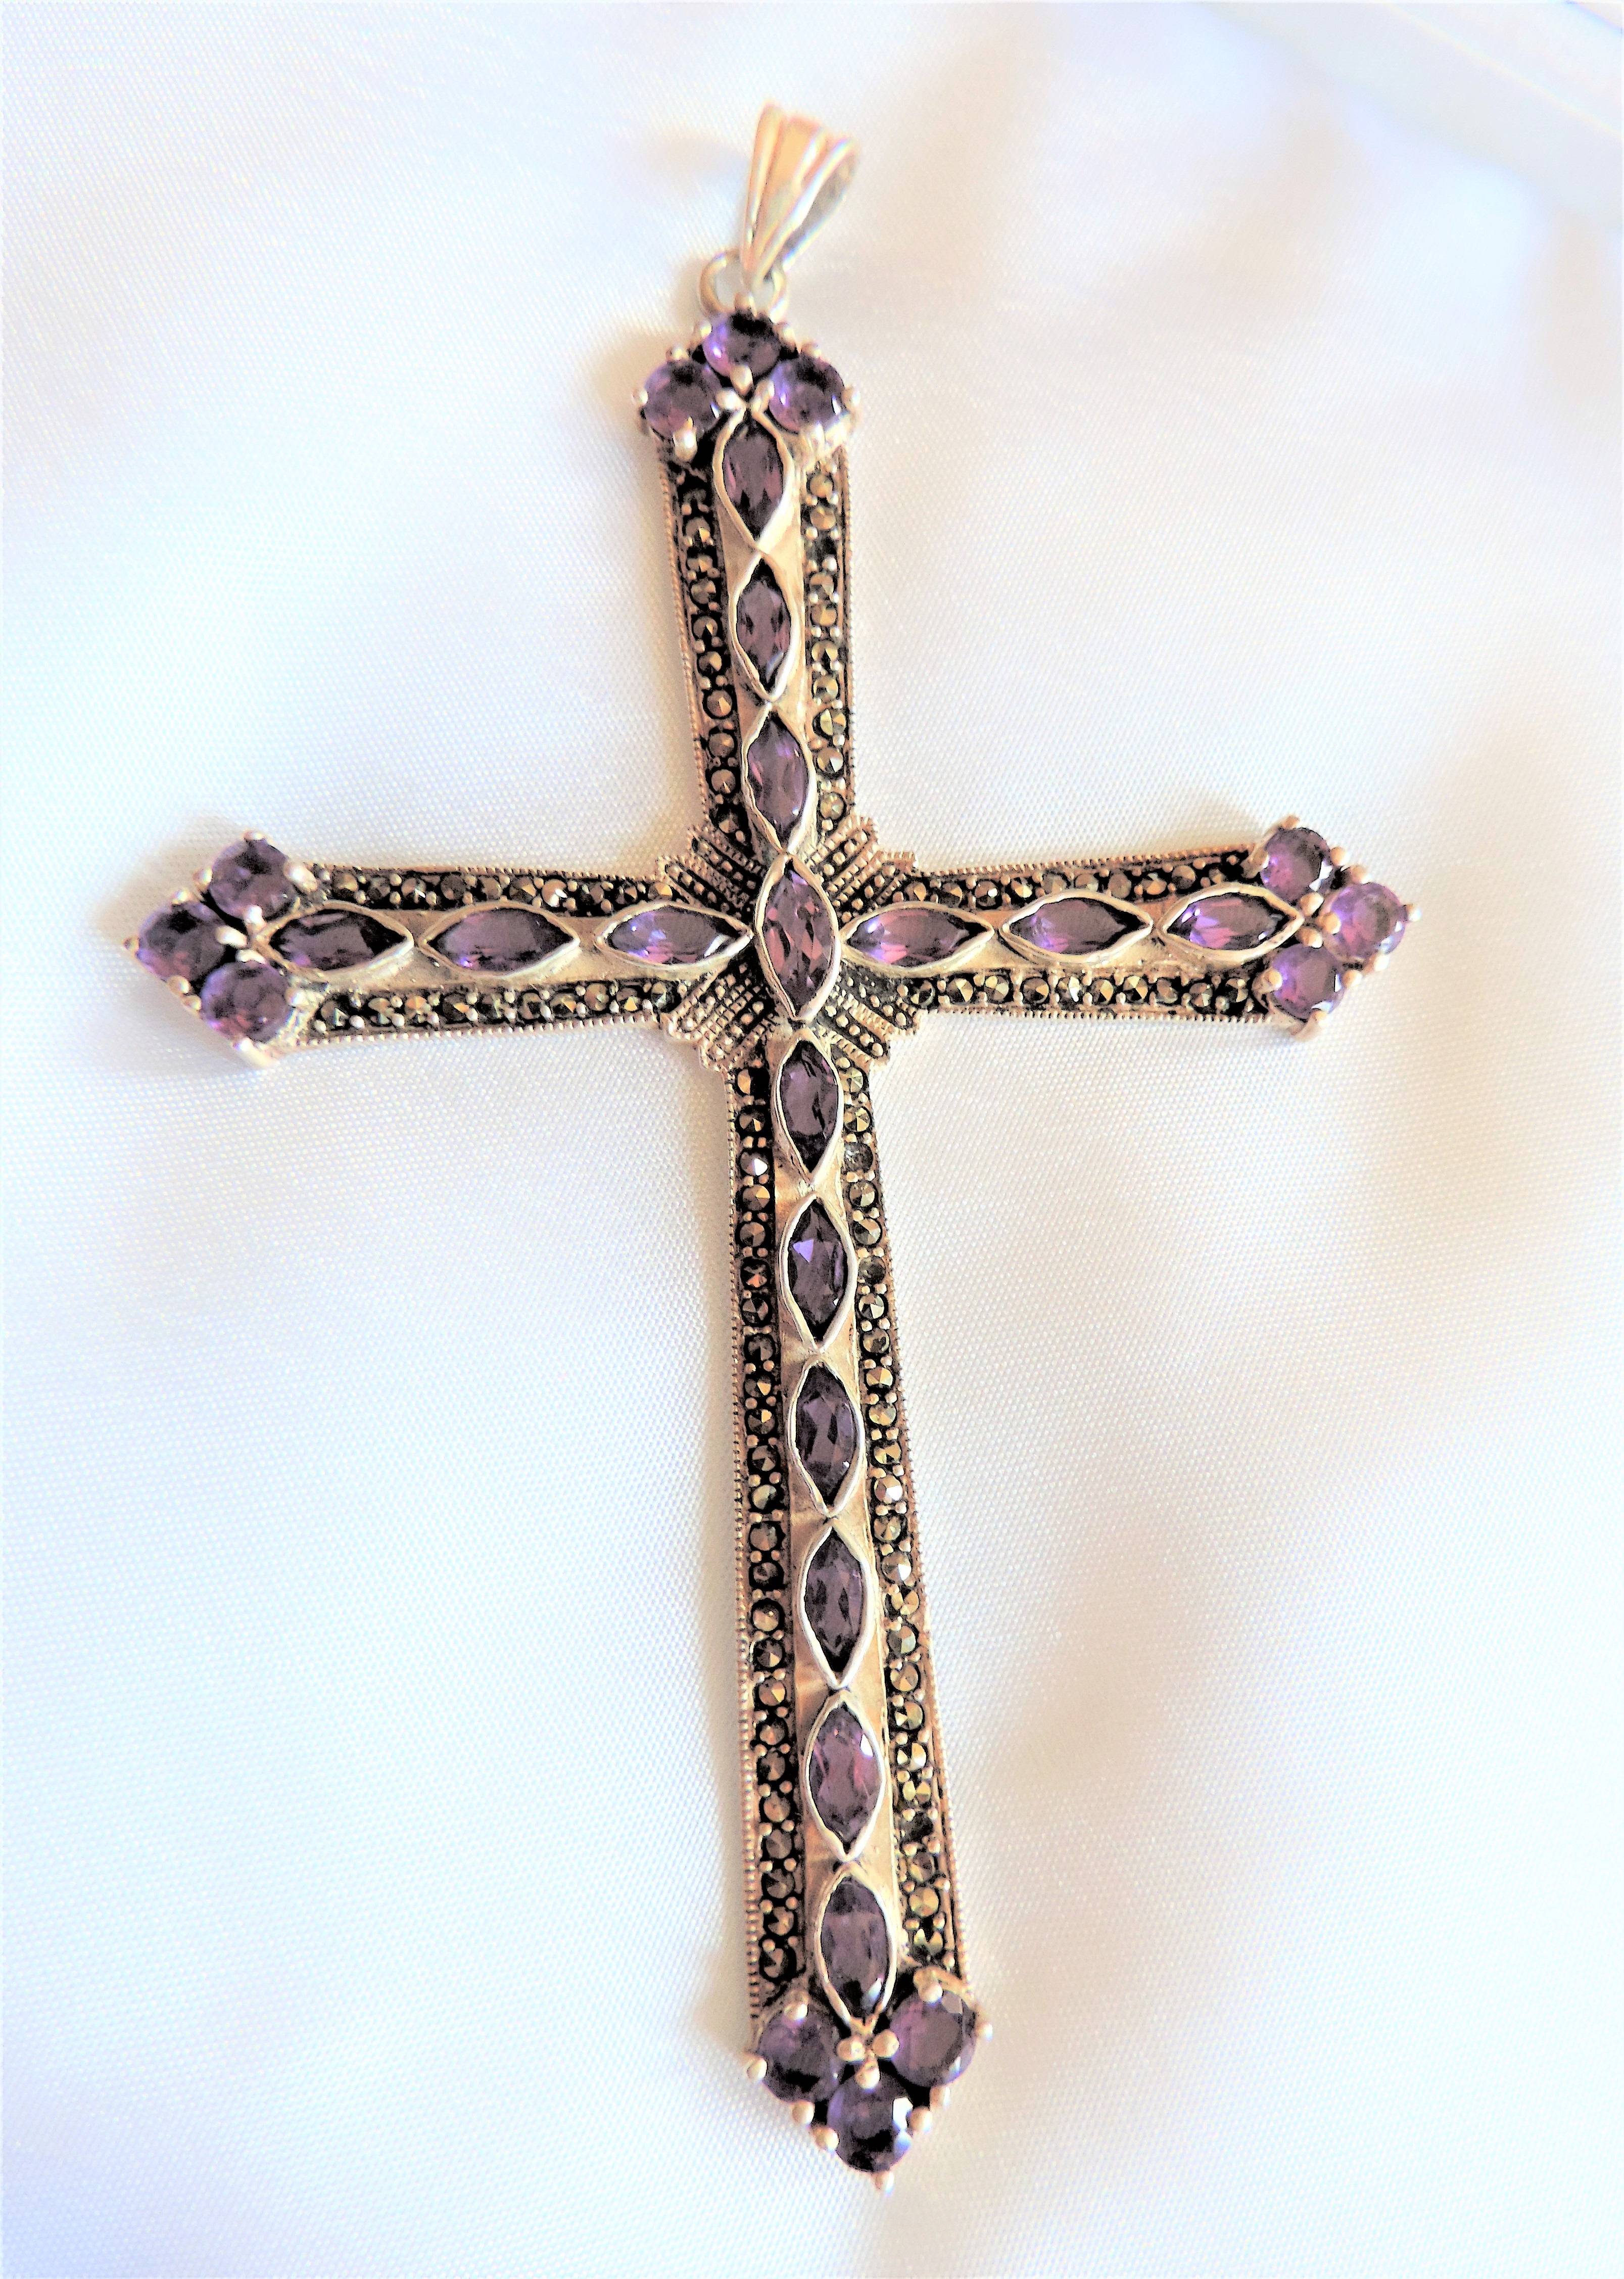 Large Vintage Sterling Silver 10ct Amethyst & Marcasite Cross Pendant 10cm Tall - Image 2 of 4